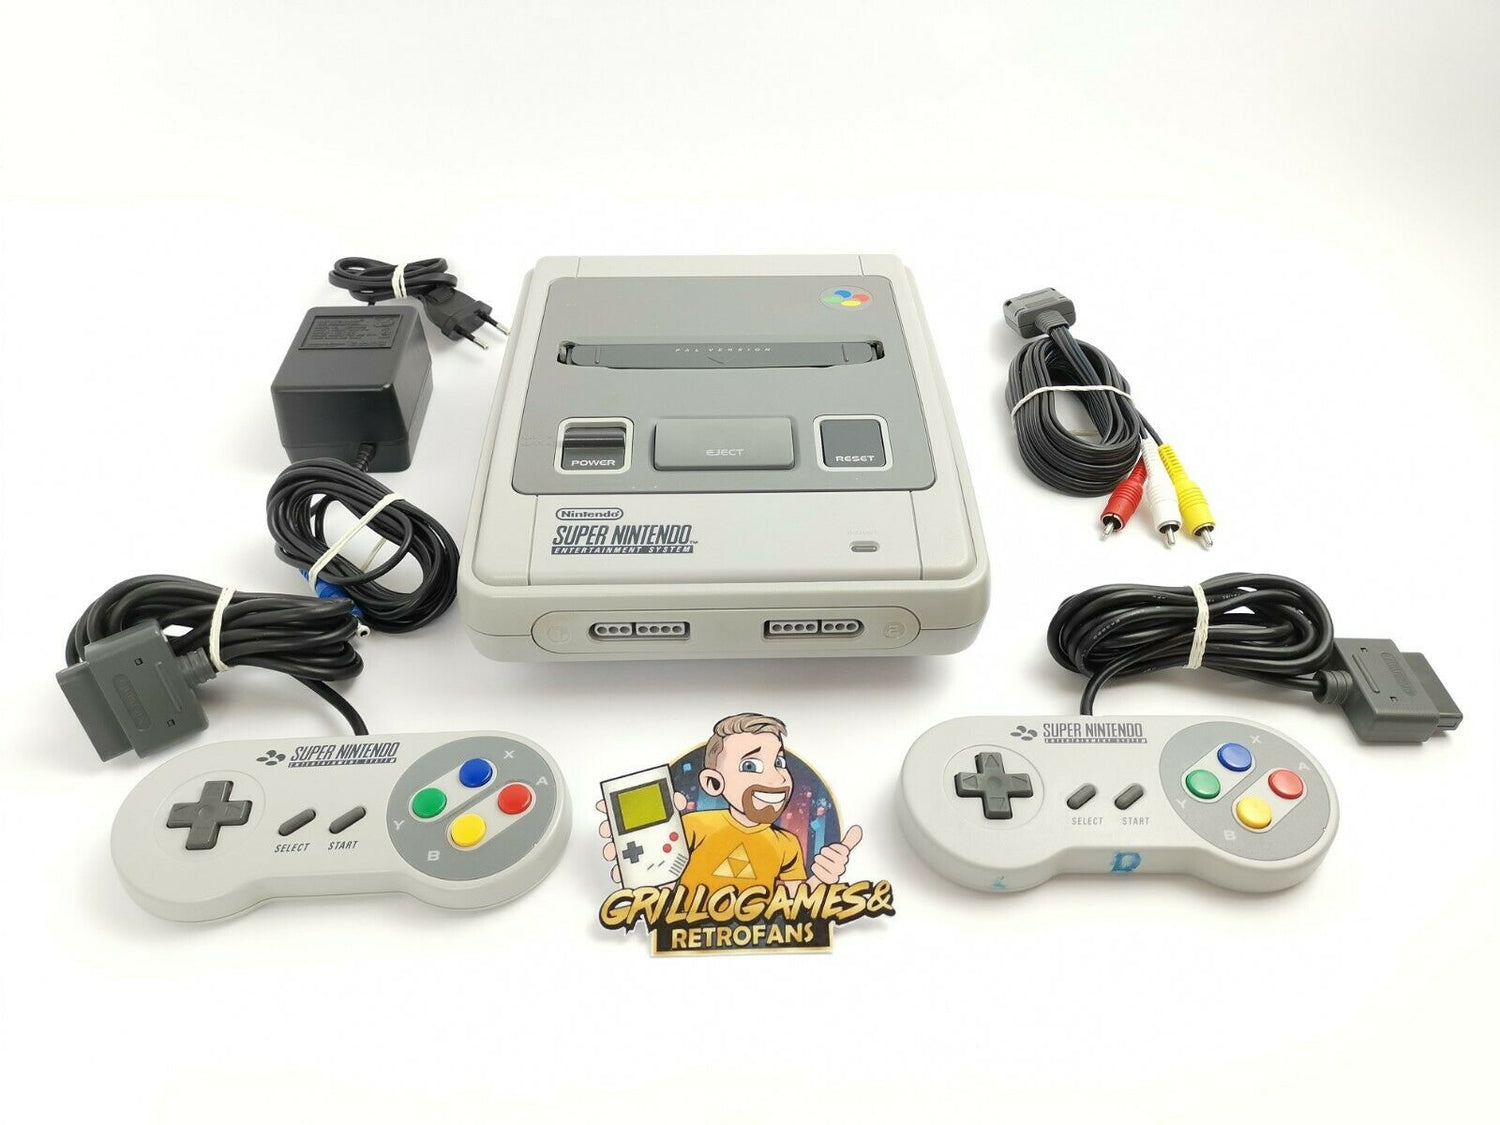 Super Nintendo multinorm console (NTSC & PAL games), with 2 controls. and cables